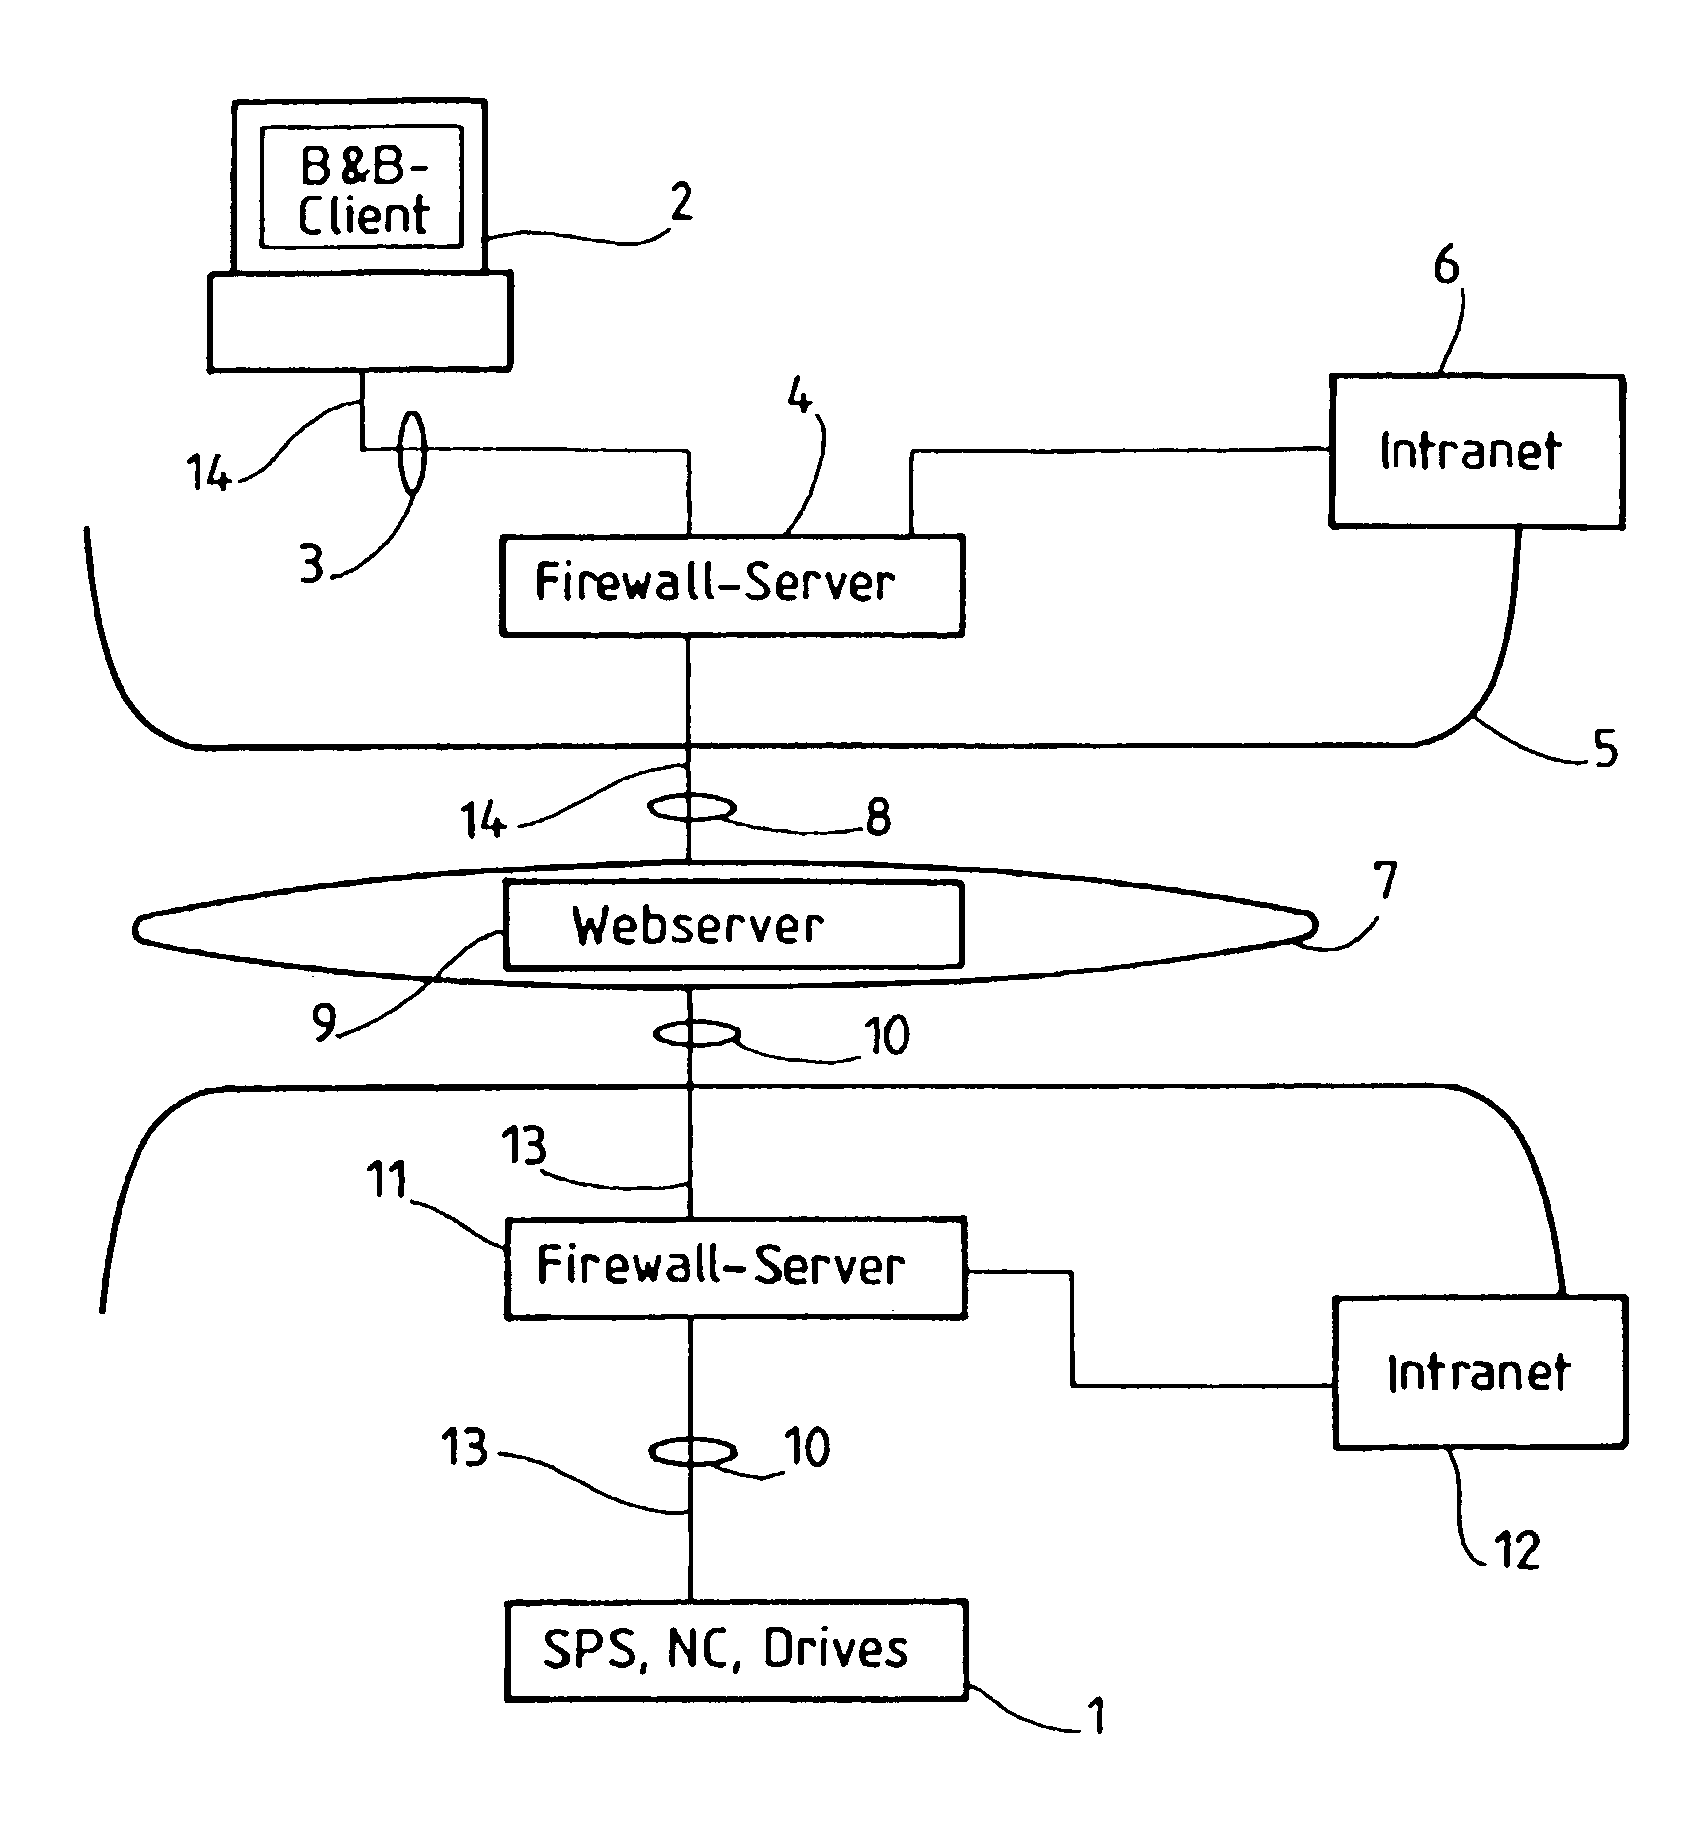 Procedure and configuration in order to transmit data